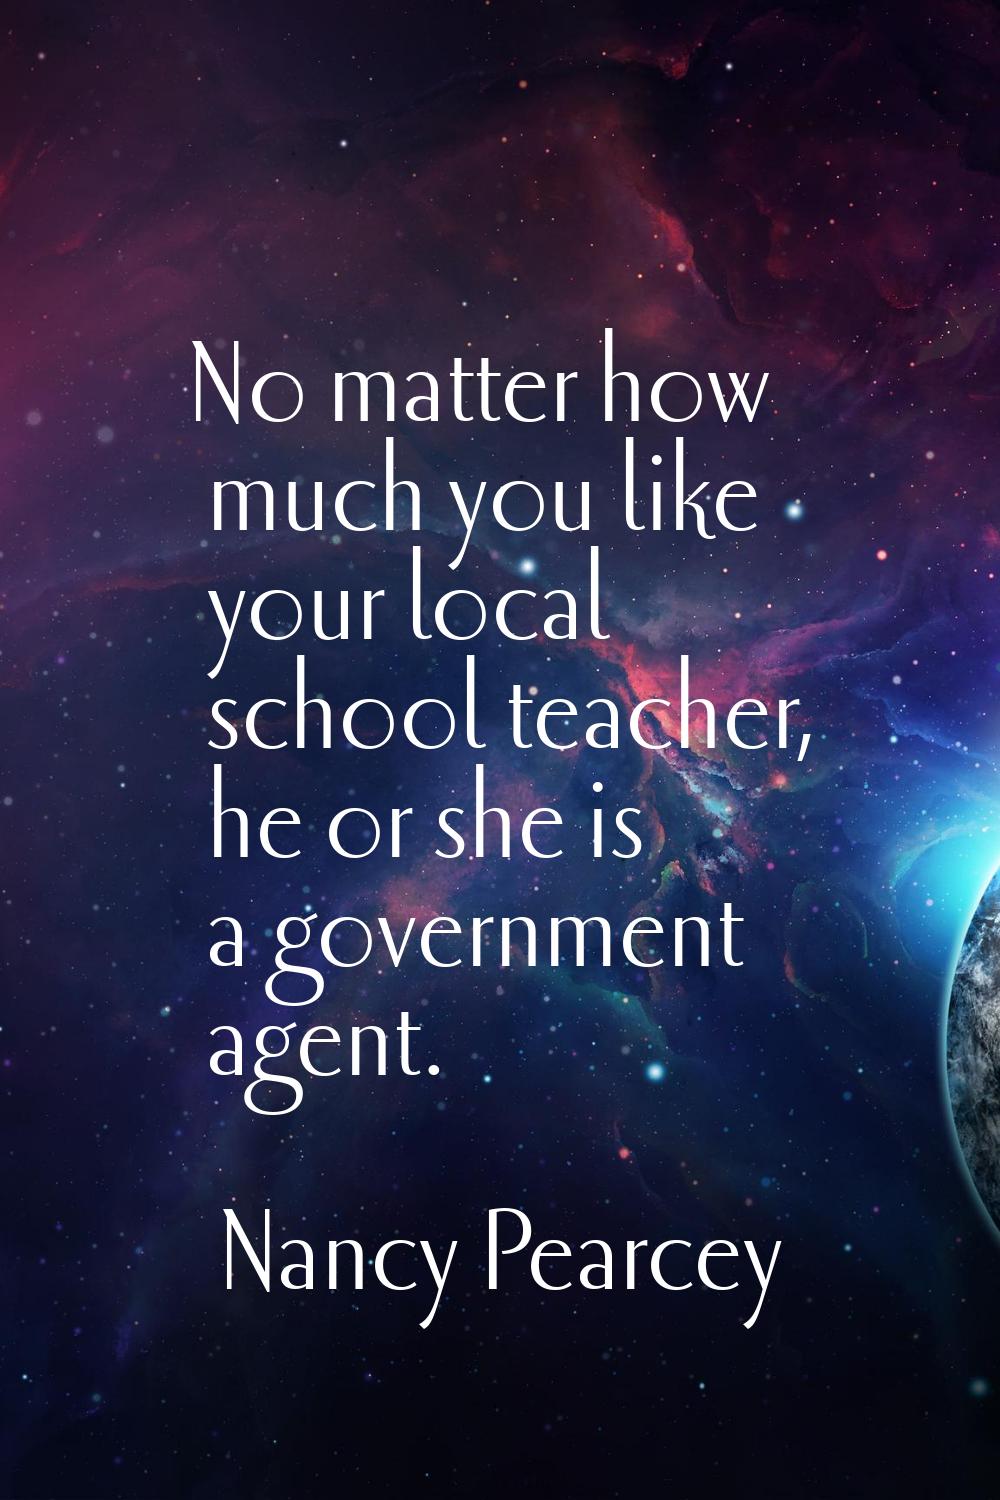 No matter how much you like your local school teacher, he or she is a government agent.